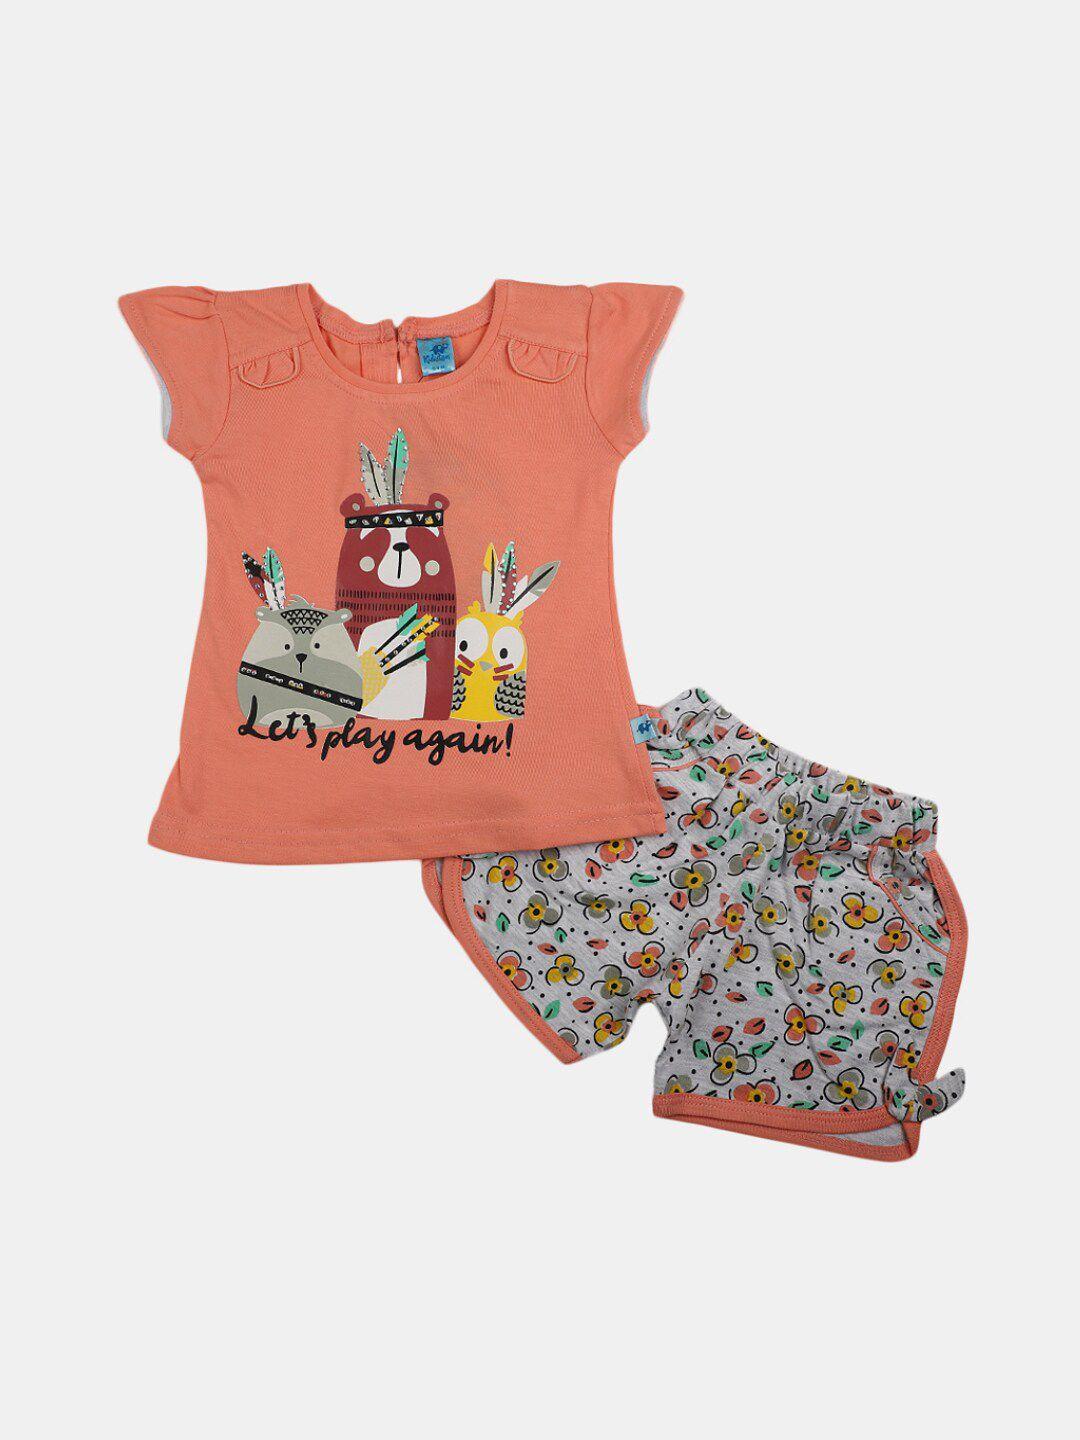 v-mart infant pure cotton printed top with shorts set